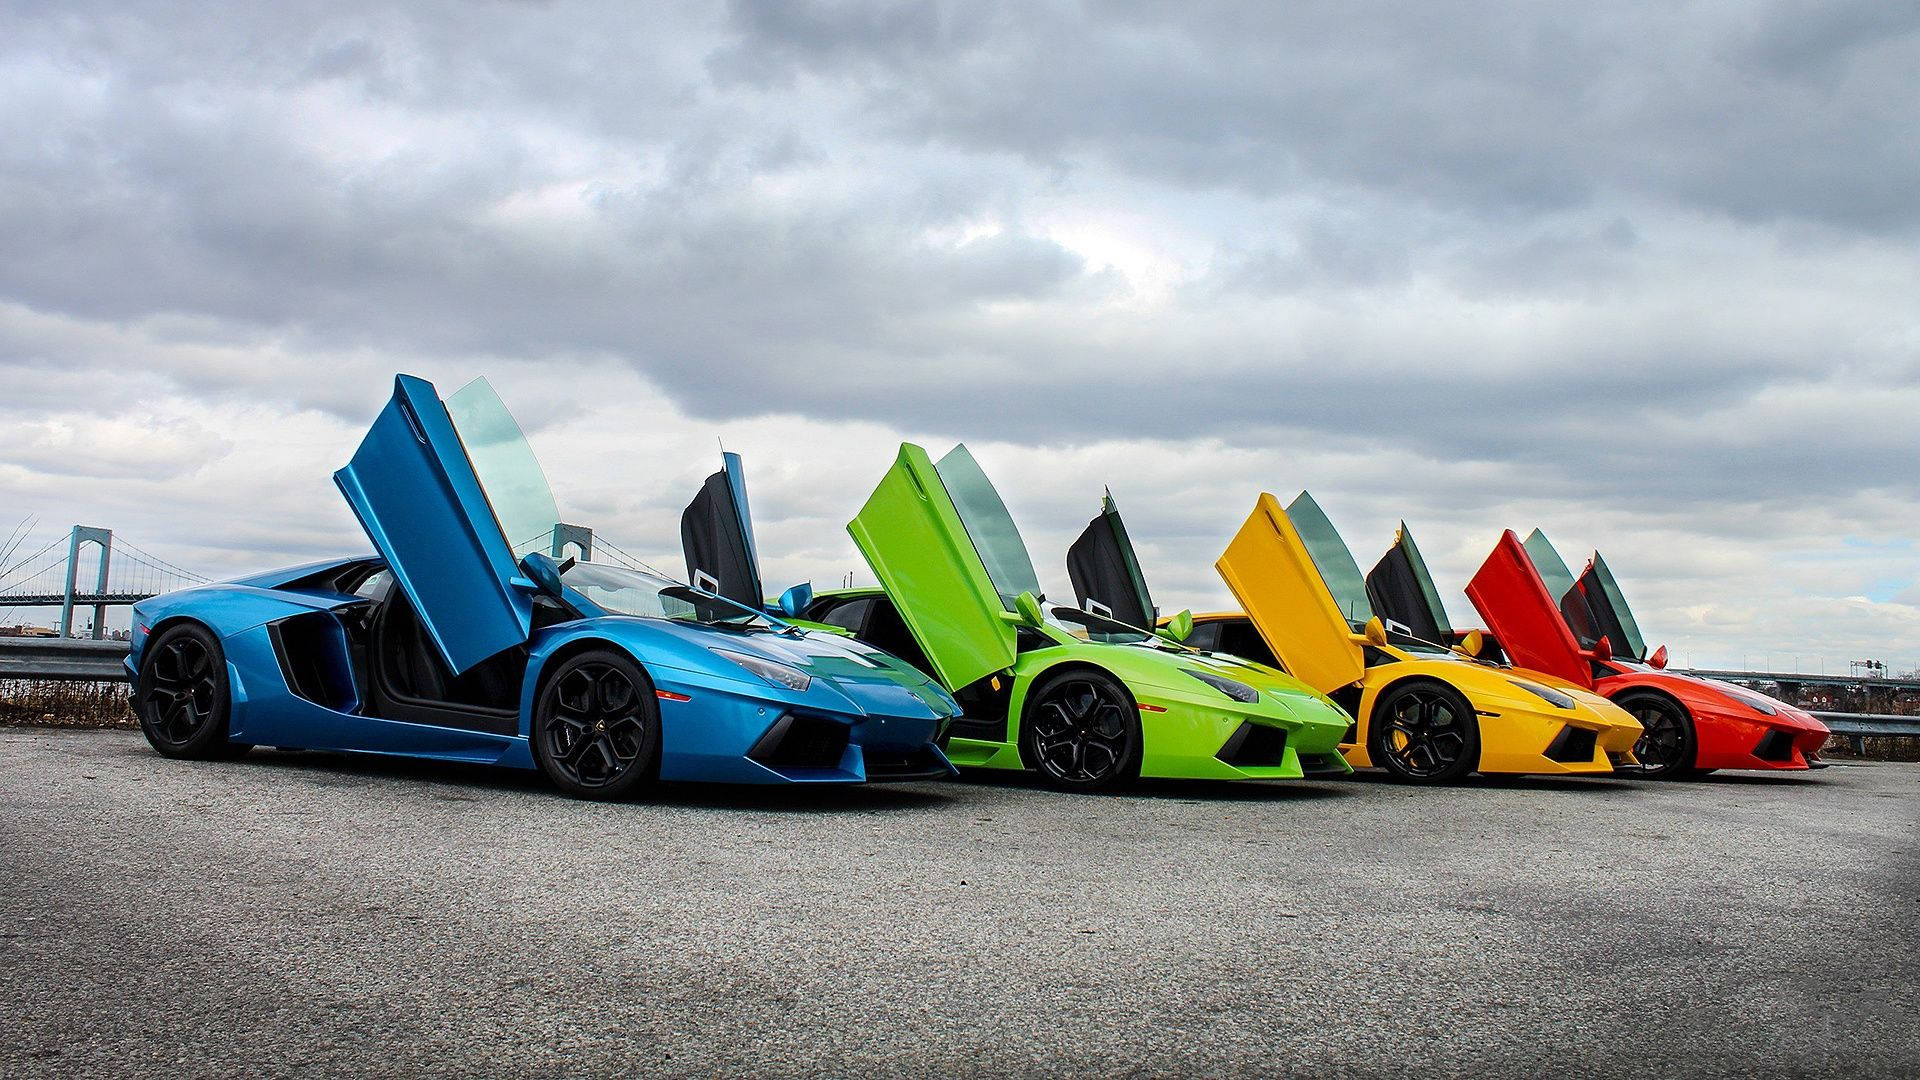 Supercar Lot Background